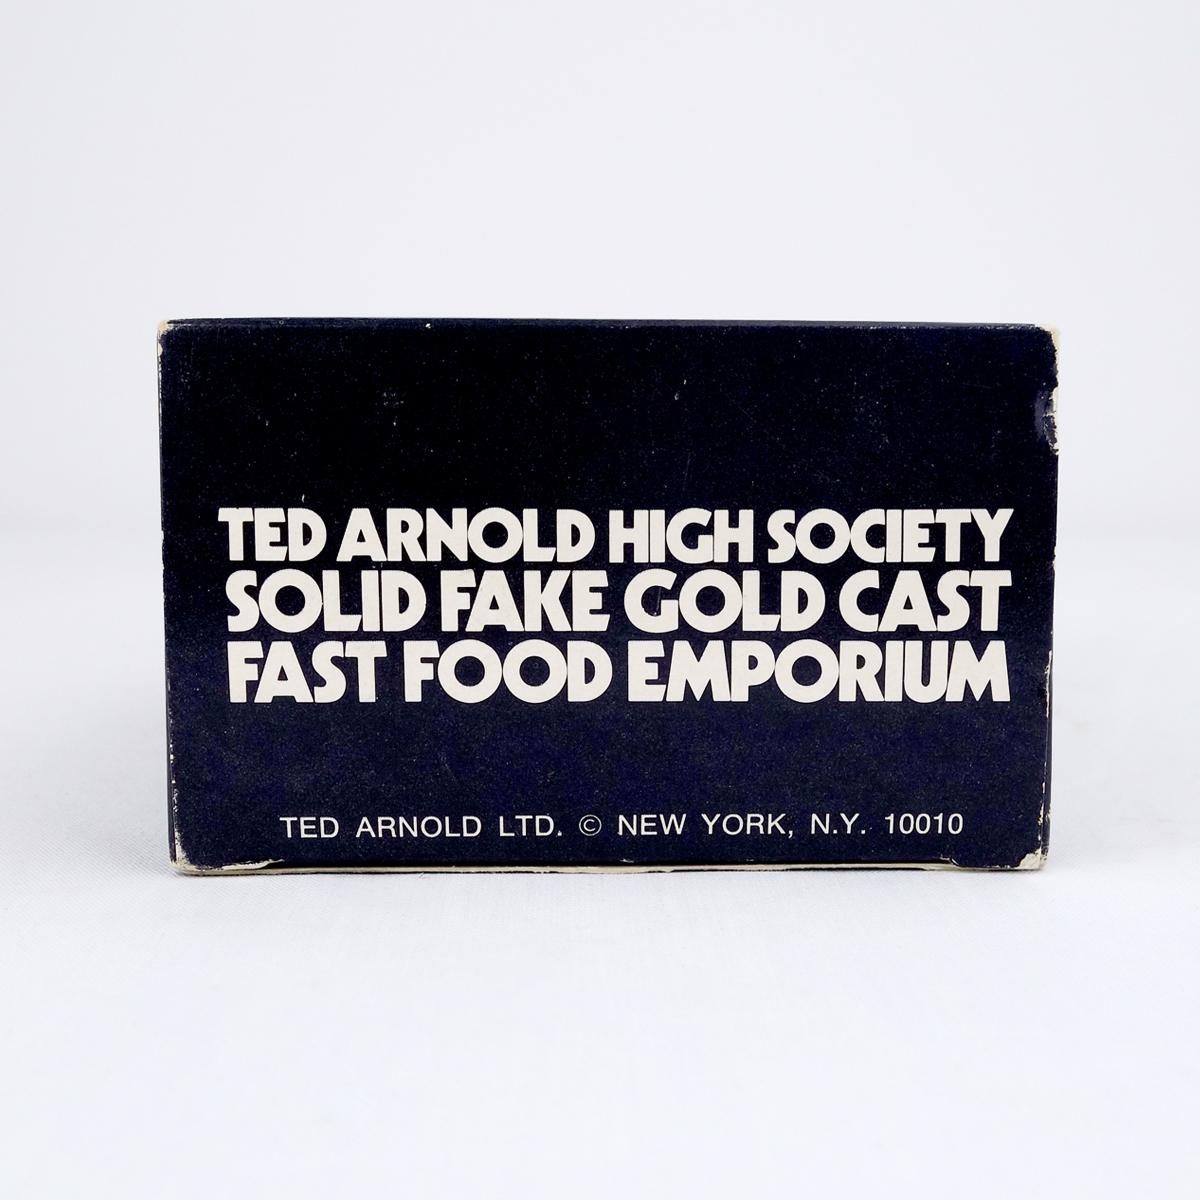 Ted Arnold High Society Solid Fake Gold Cast Fast Food Emporium Slice of Pizza In Good Condition For Sale In Doornspijk, NL